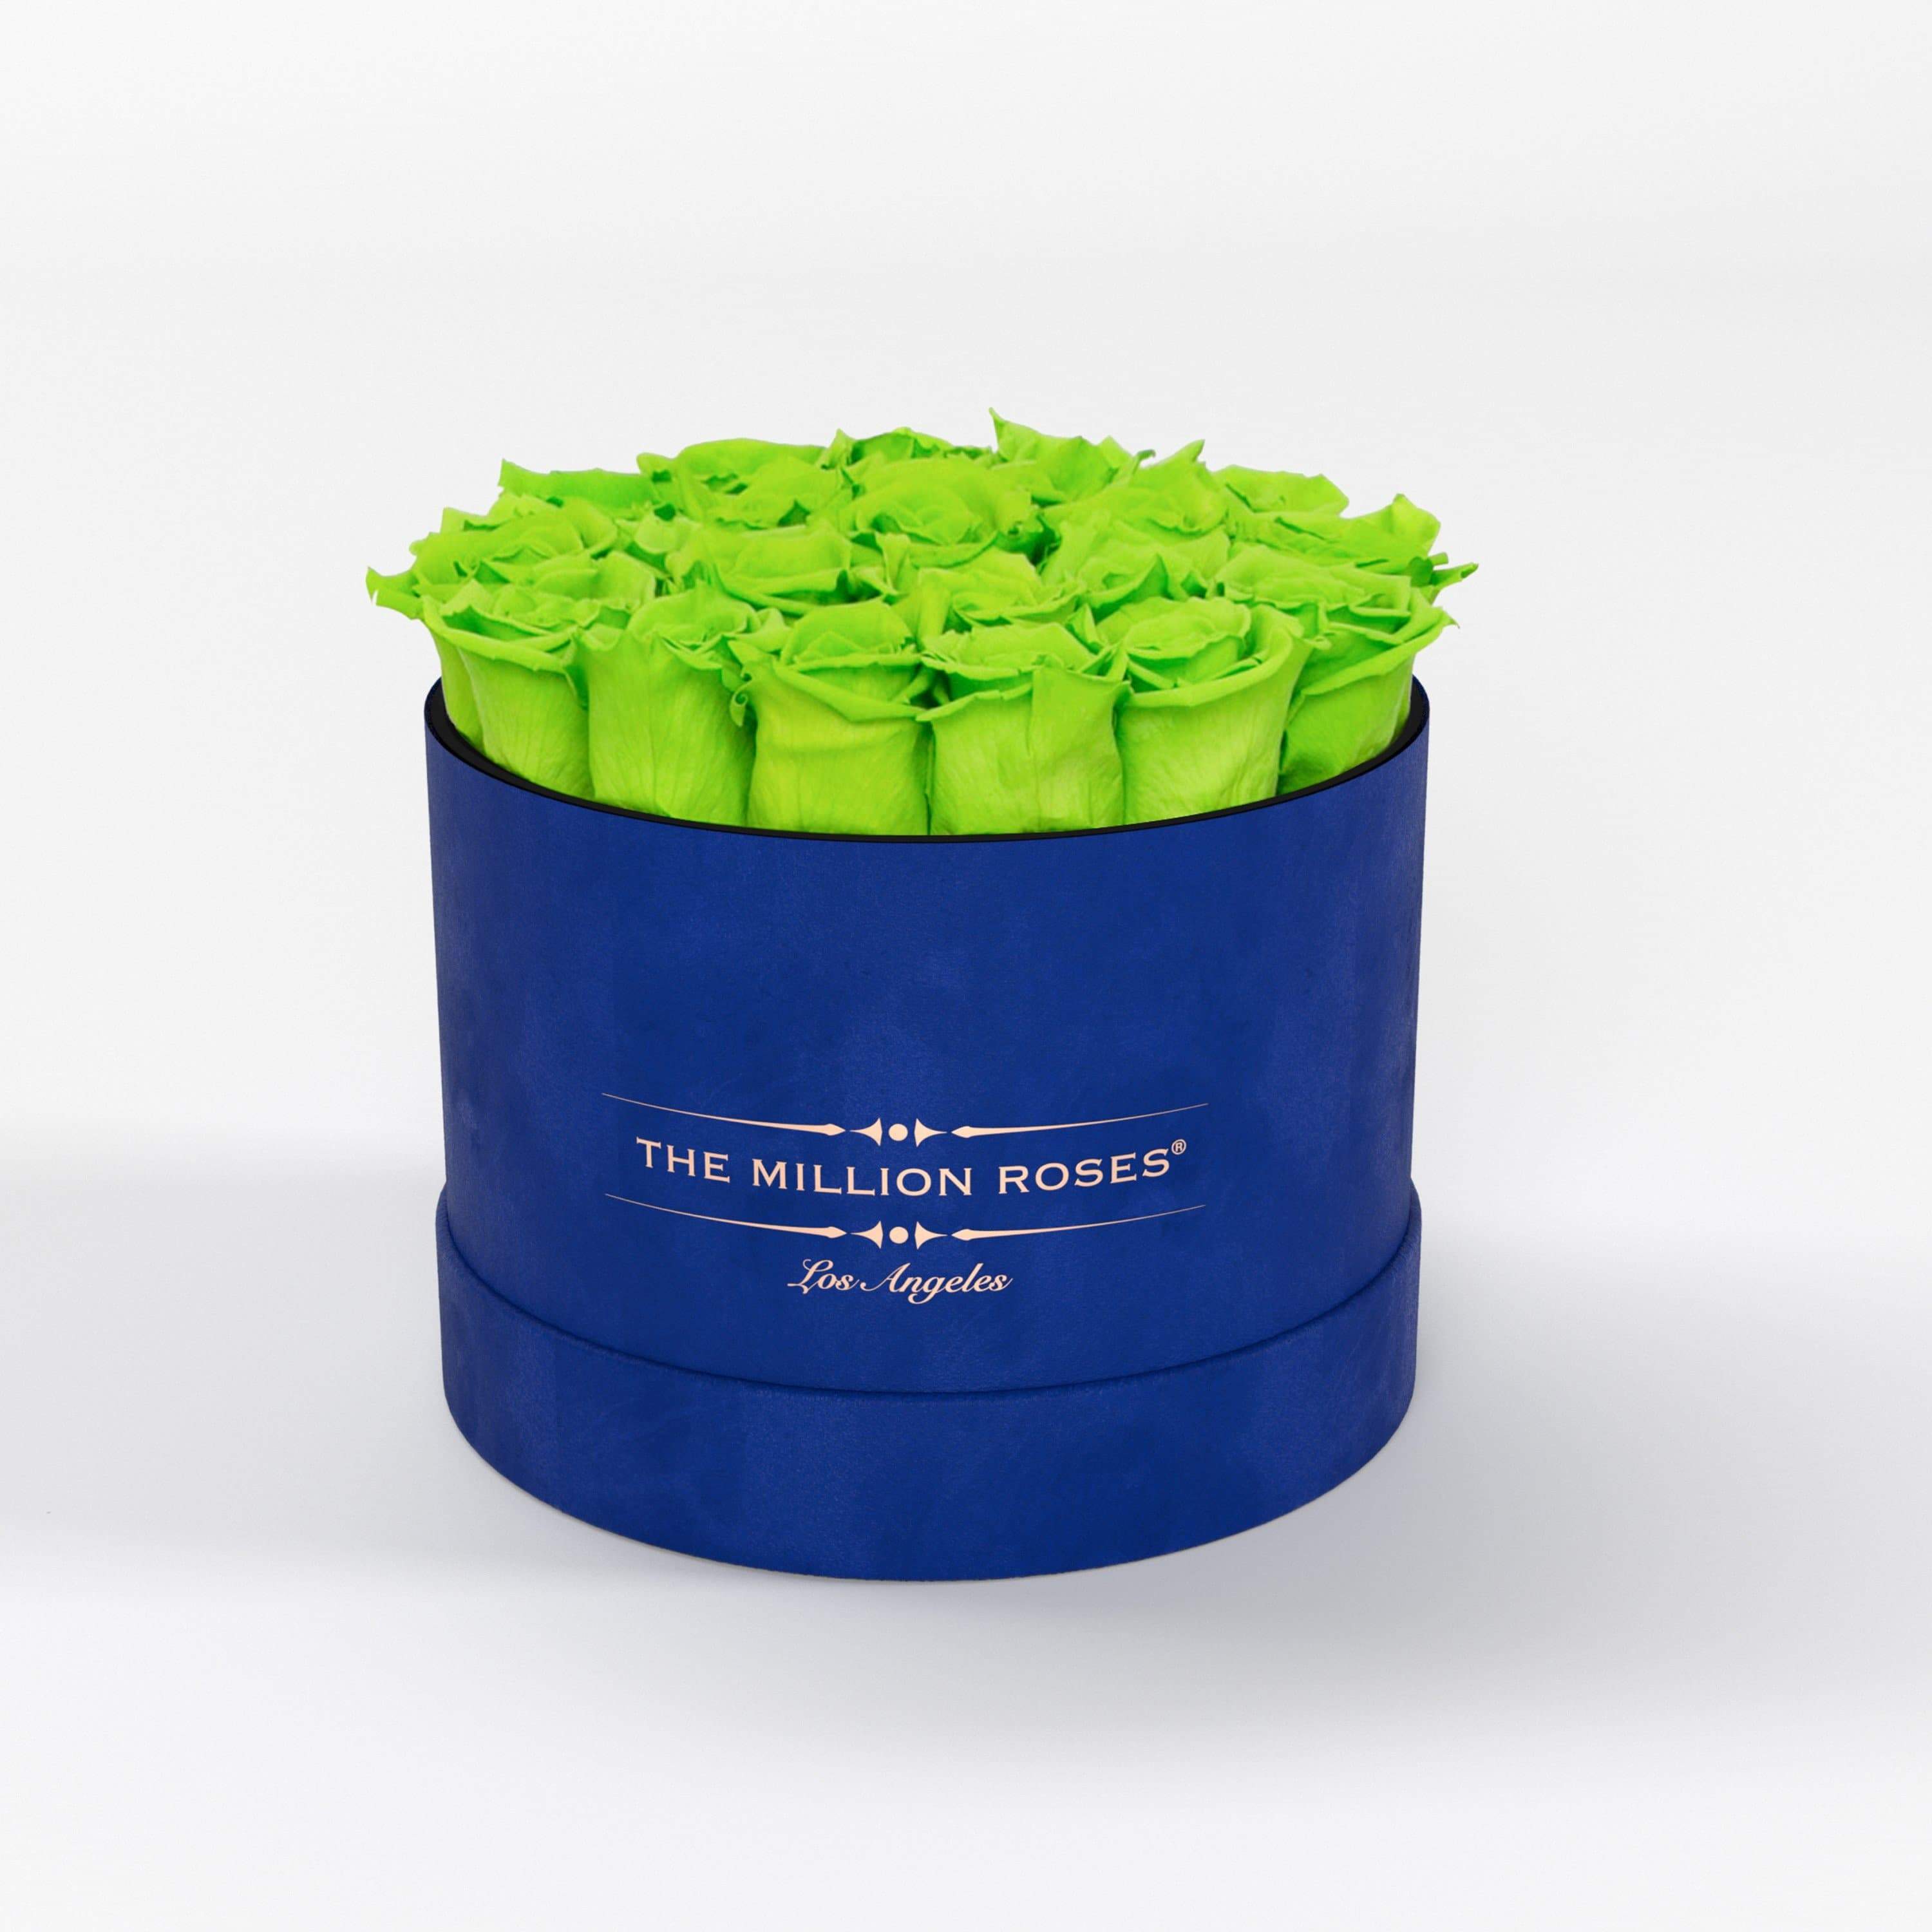 Classic Royal Blue Suede Box | All Colors - The Million Roses